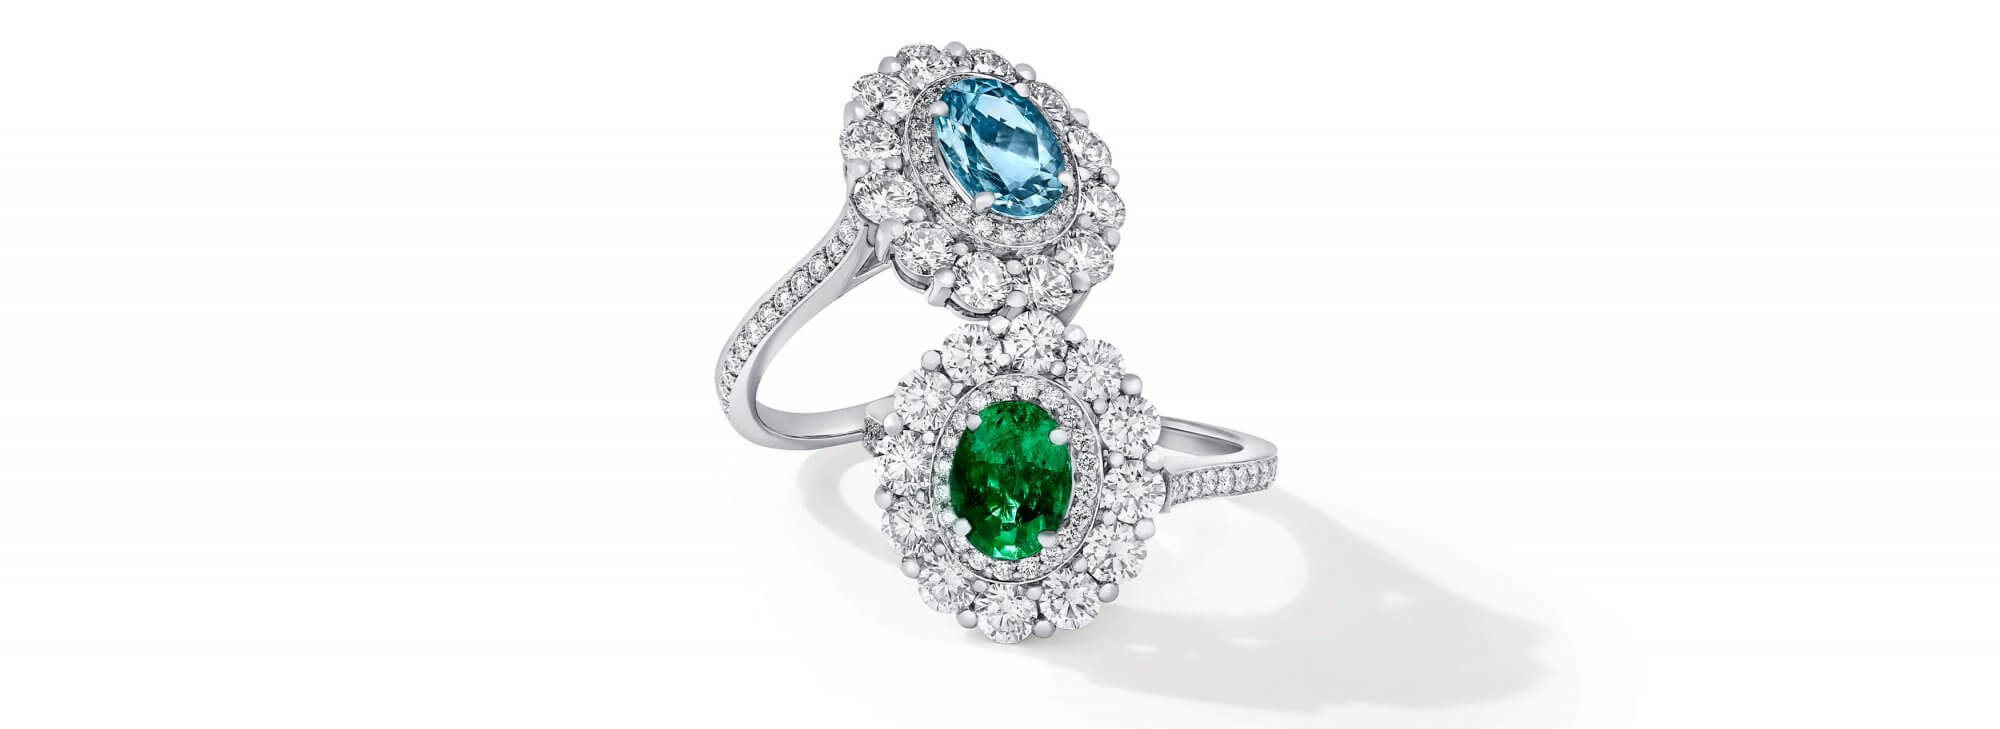 Garrard 1735 bridal jewellery collection Aquamarine and emerald Double Cluster Engagement Ring with Diamonds